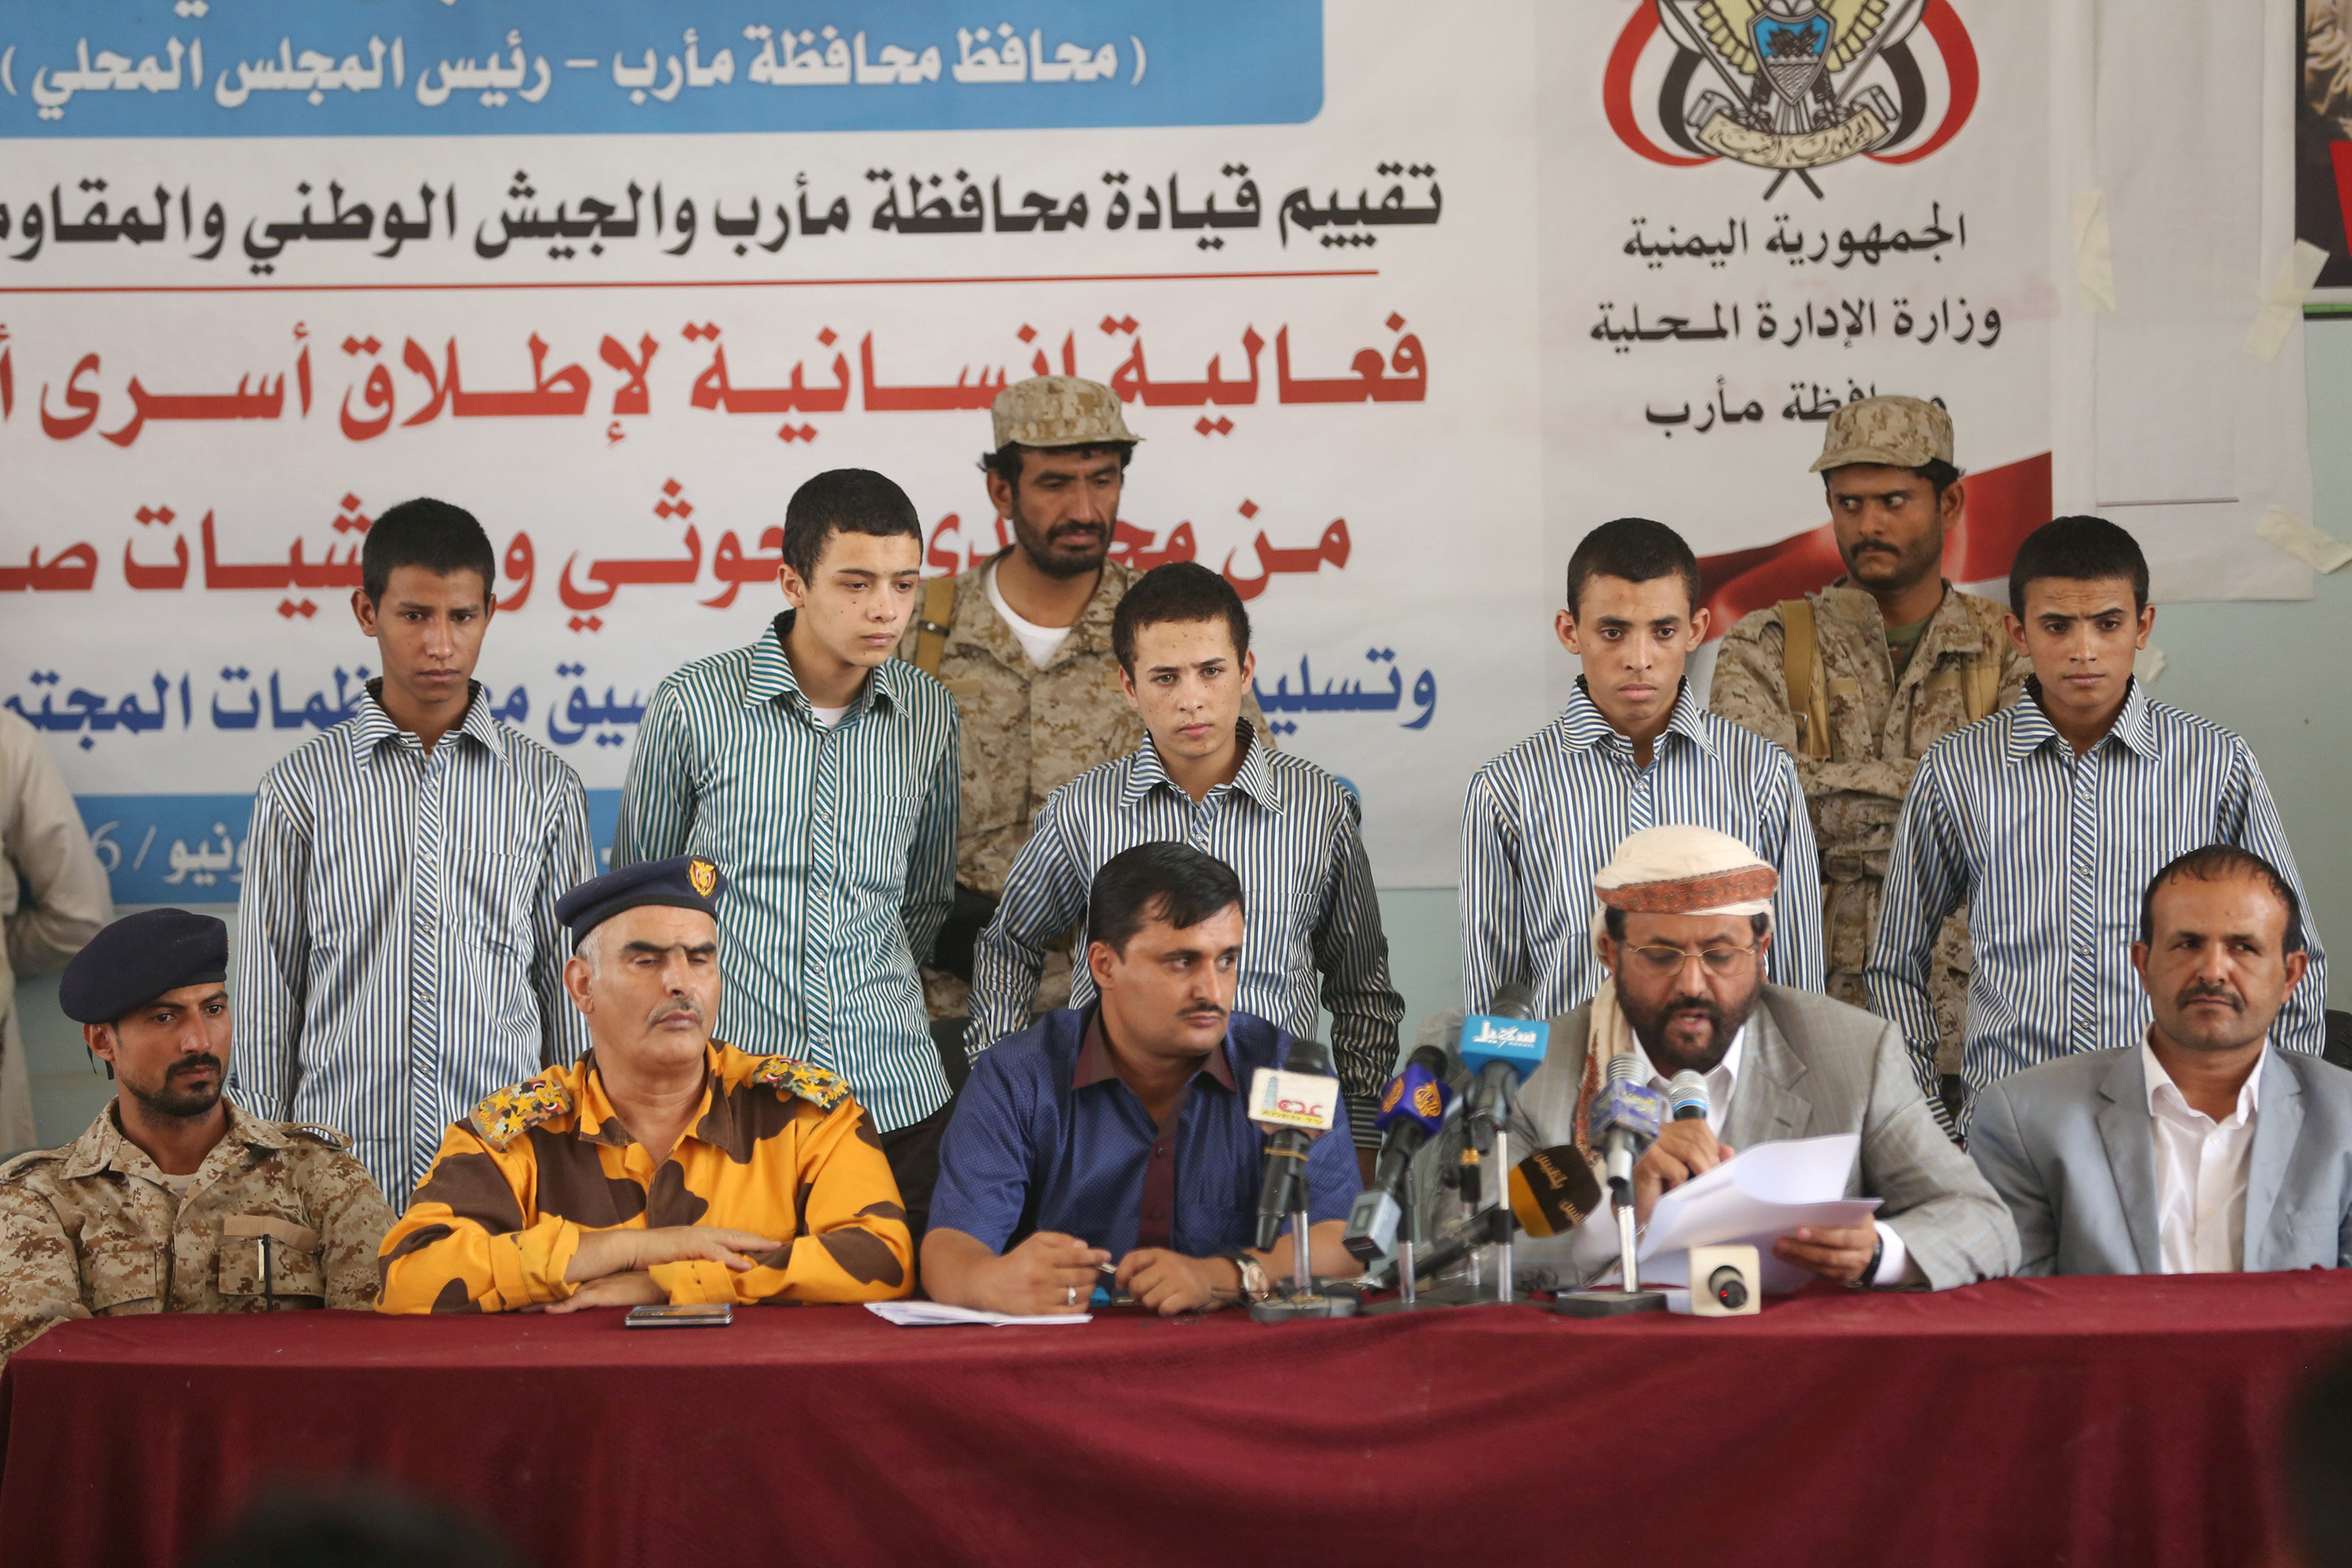 Yemen government says to free 54 children captured in fighting with Houthis